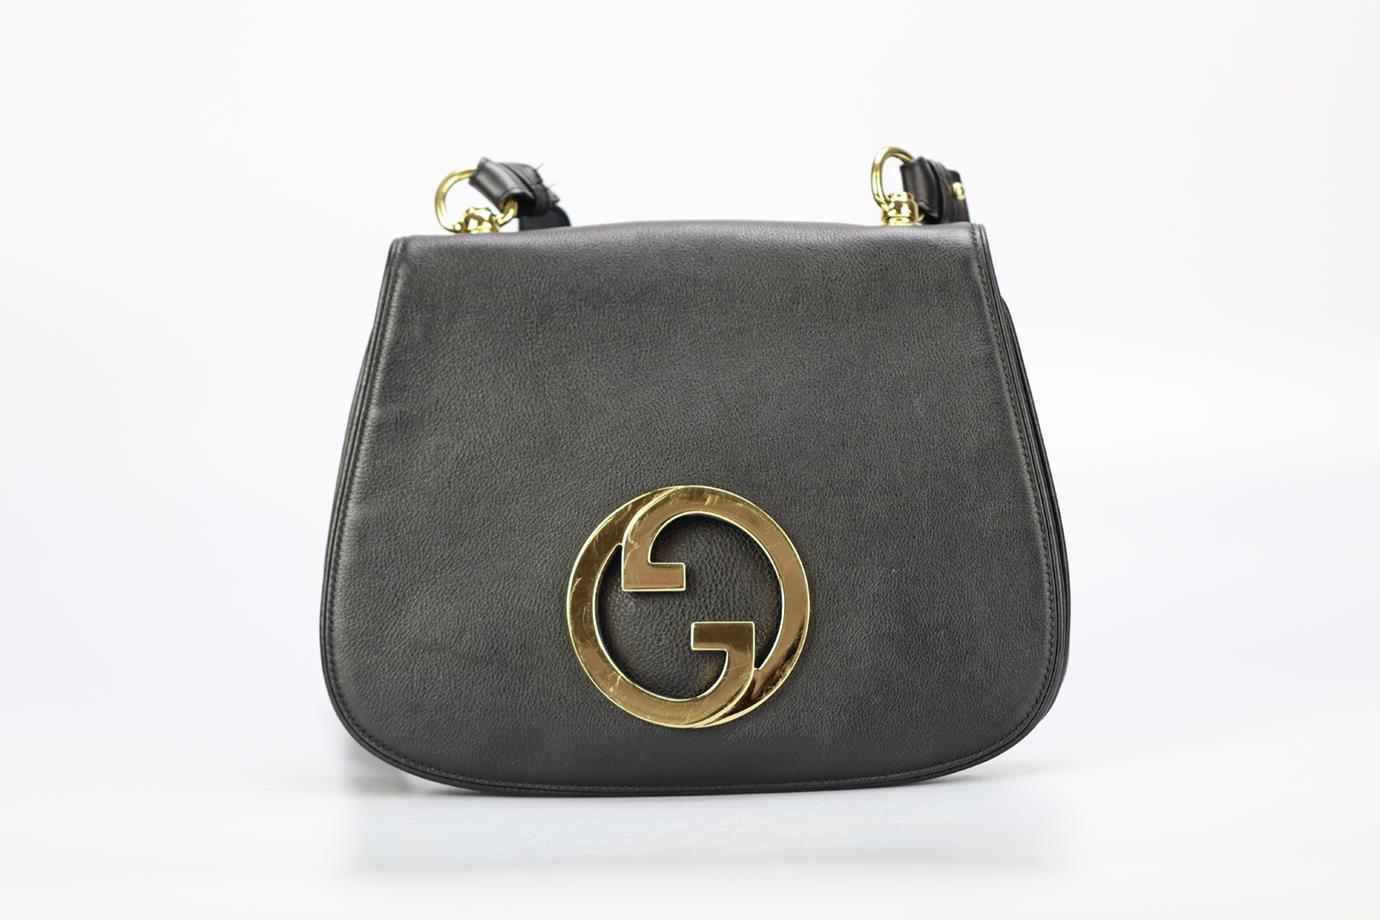 Gucci New Blondie Gg Leather Shoulder Bag. Black. Magnetic fastening - Front. Comes with - additional shoulder strap. Does not come with - dustbag or box. Height: 8.5 in. Width: 11.1 in. Depth: 1.9 in. Strap drop: 22 in. Condition: Used. Good